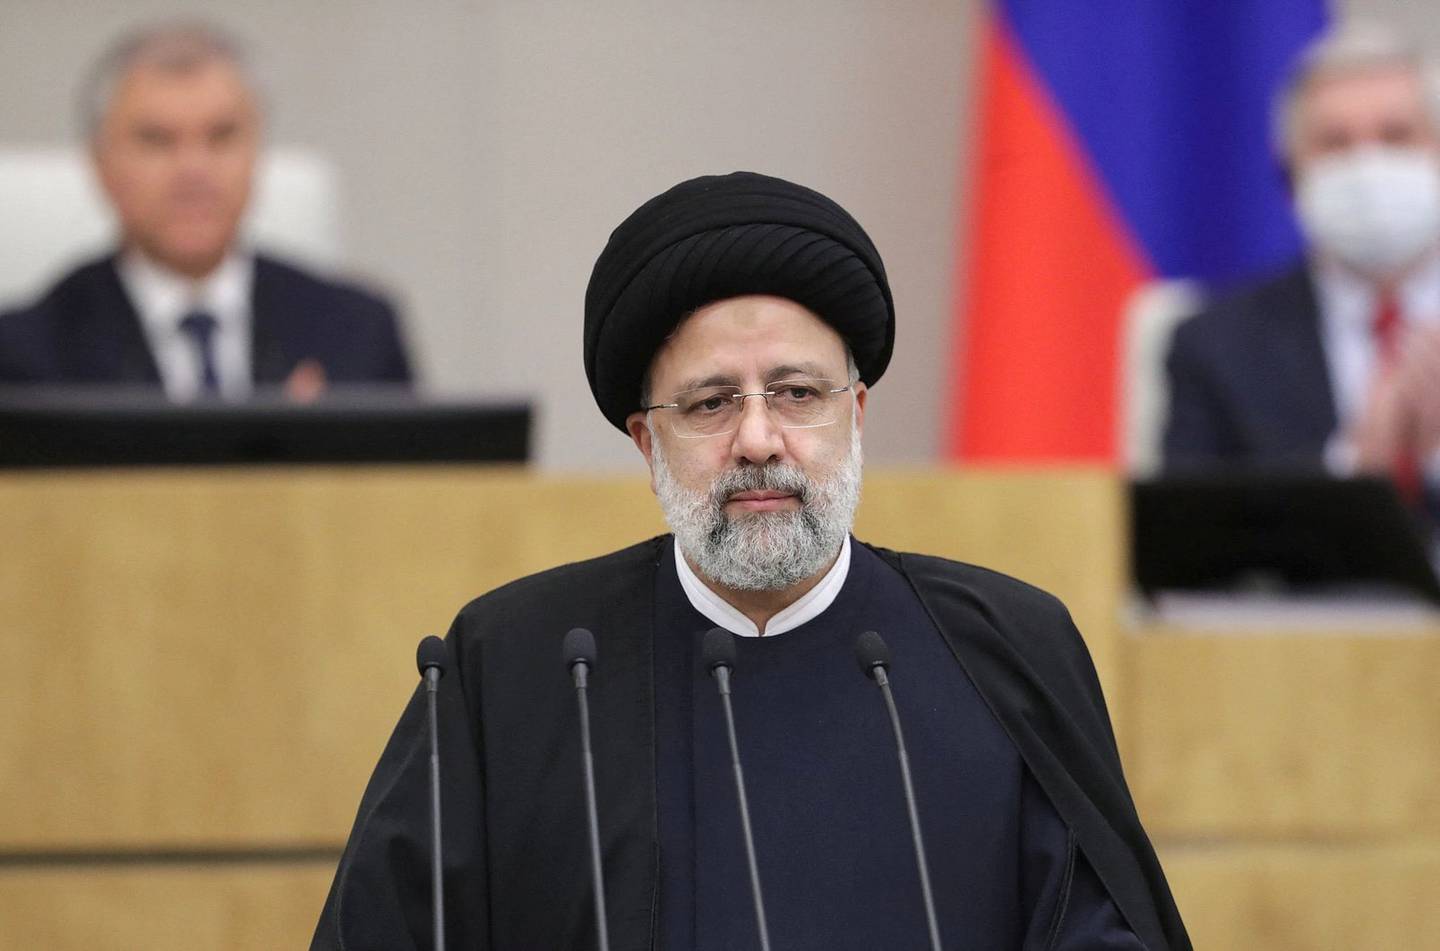 Iranian President Ebrahim Raisi delivers a speech during a session of the State Duma, the lower house of Russia's Parliament, in Moscow. Russian State Duma/Handout via Reuters